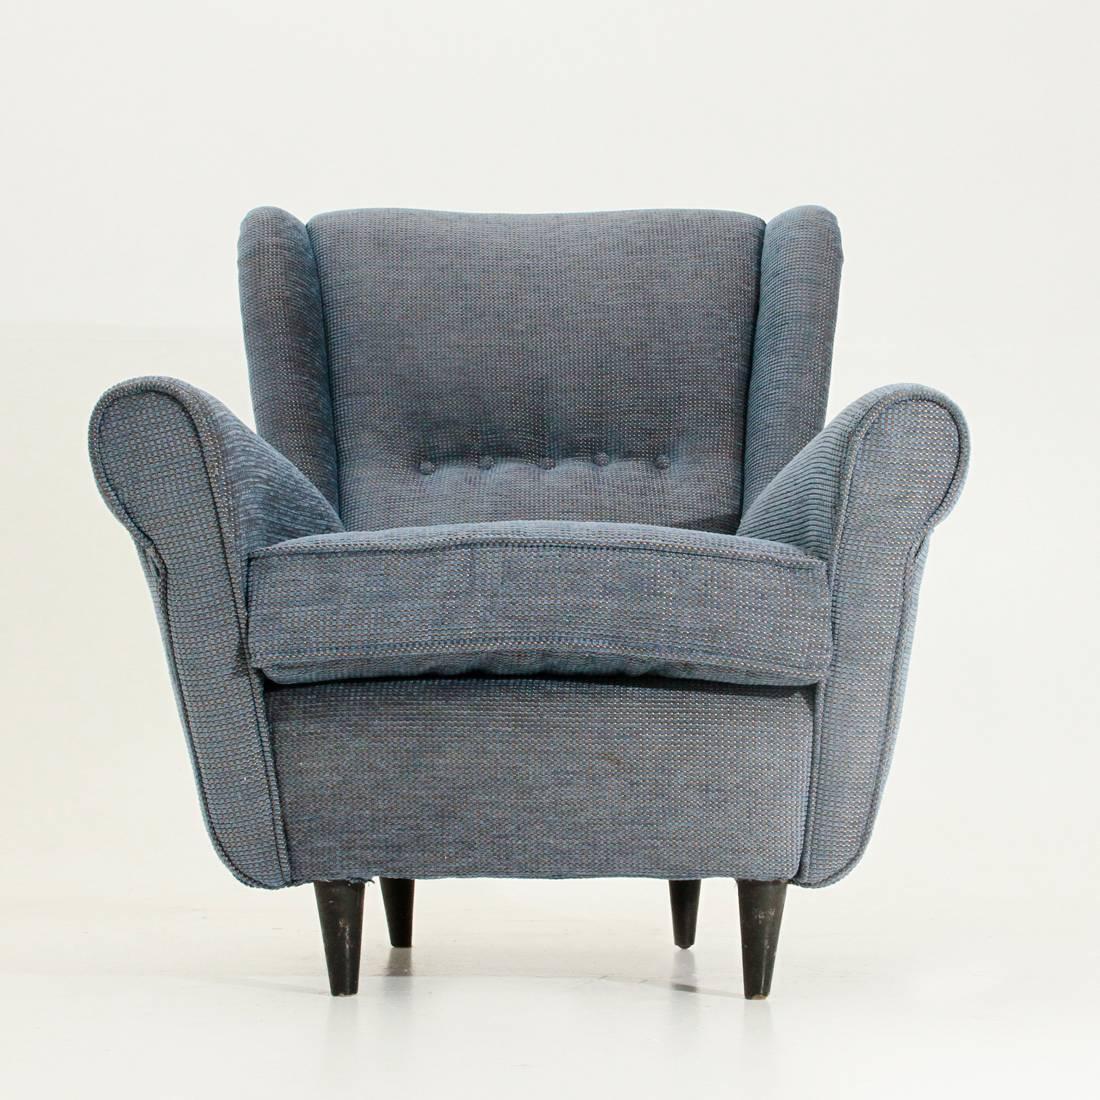 Fabric Italian Armchairs with Conical Shape Legs